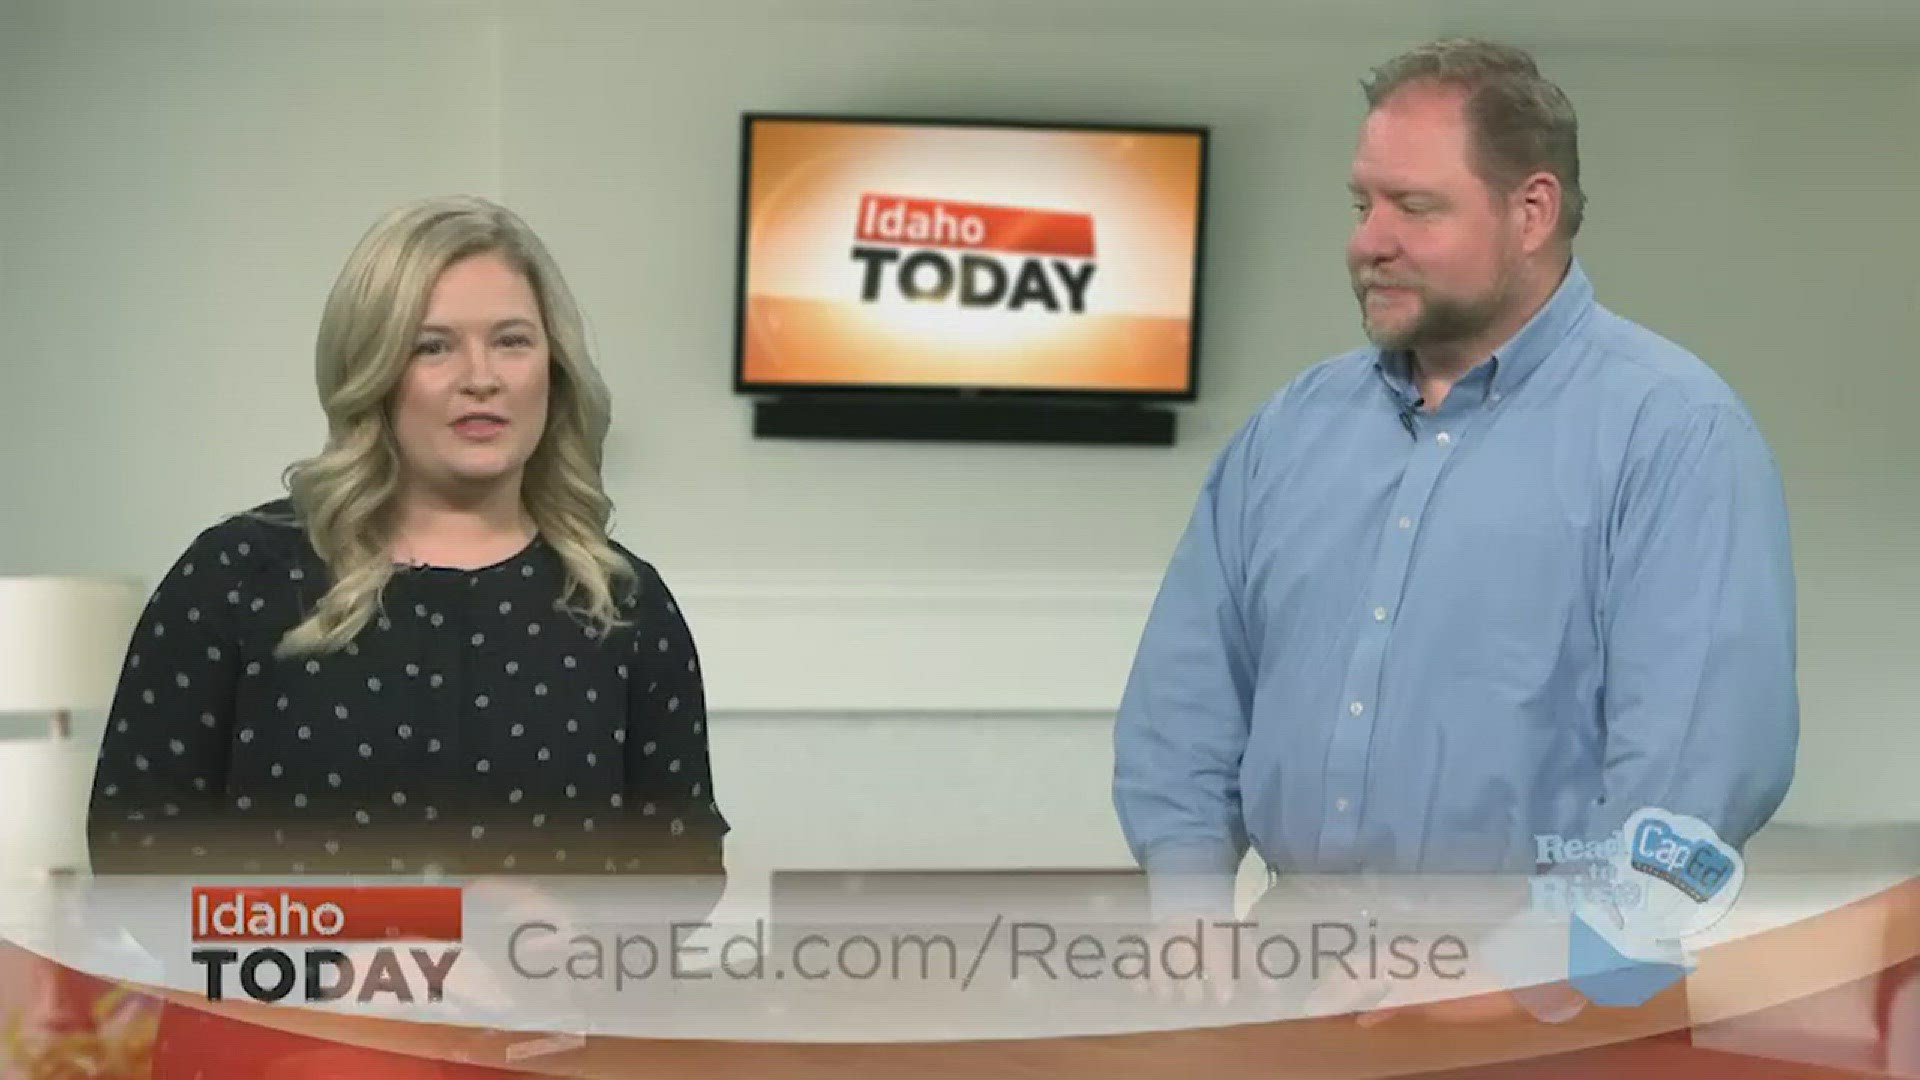 Idaho Today: CapEd Credit Union's Read to Rise Program